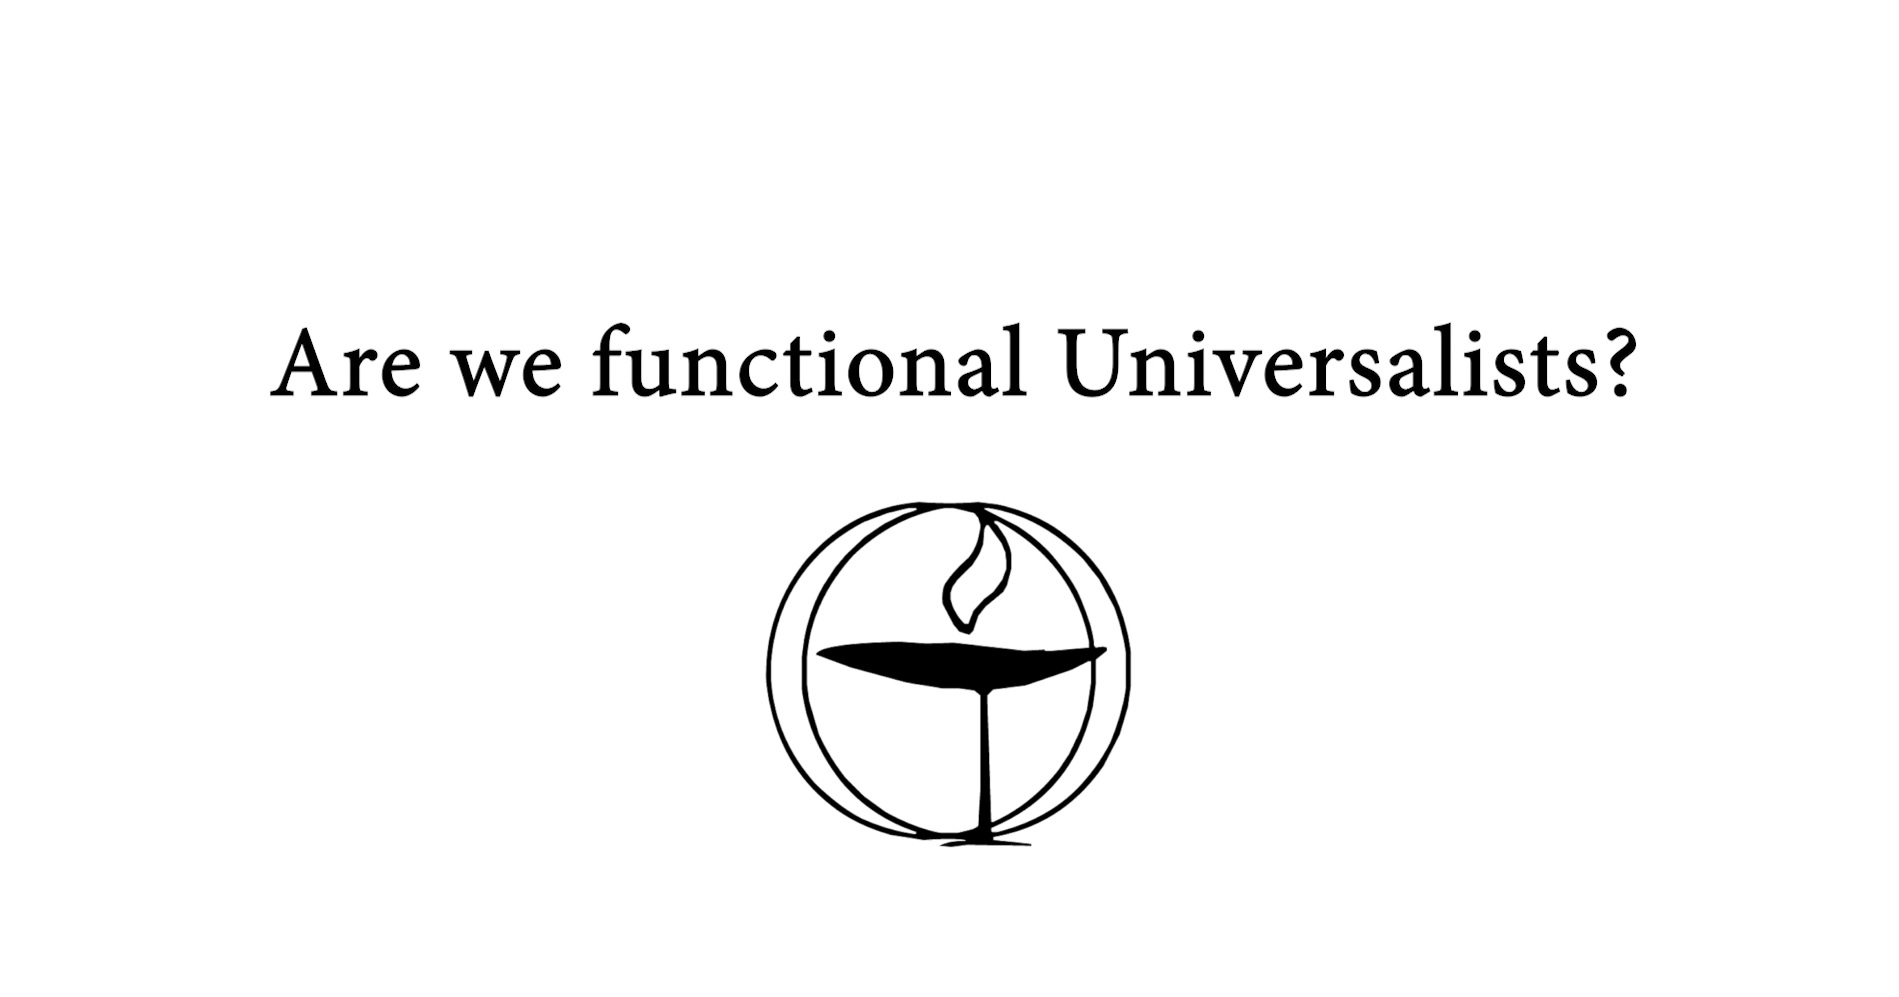 Are we functional Universalists?